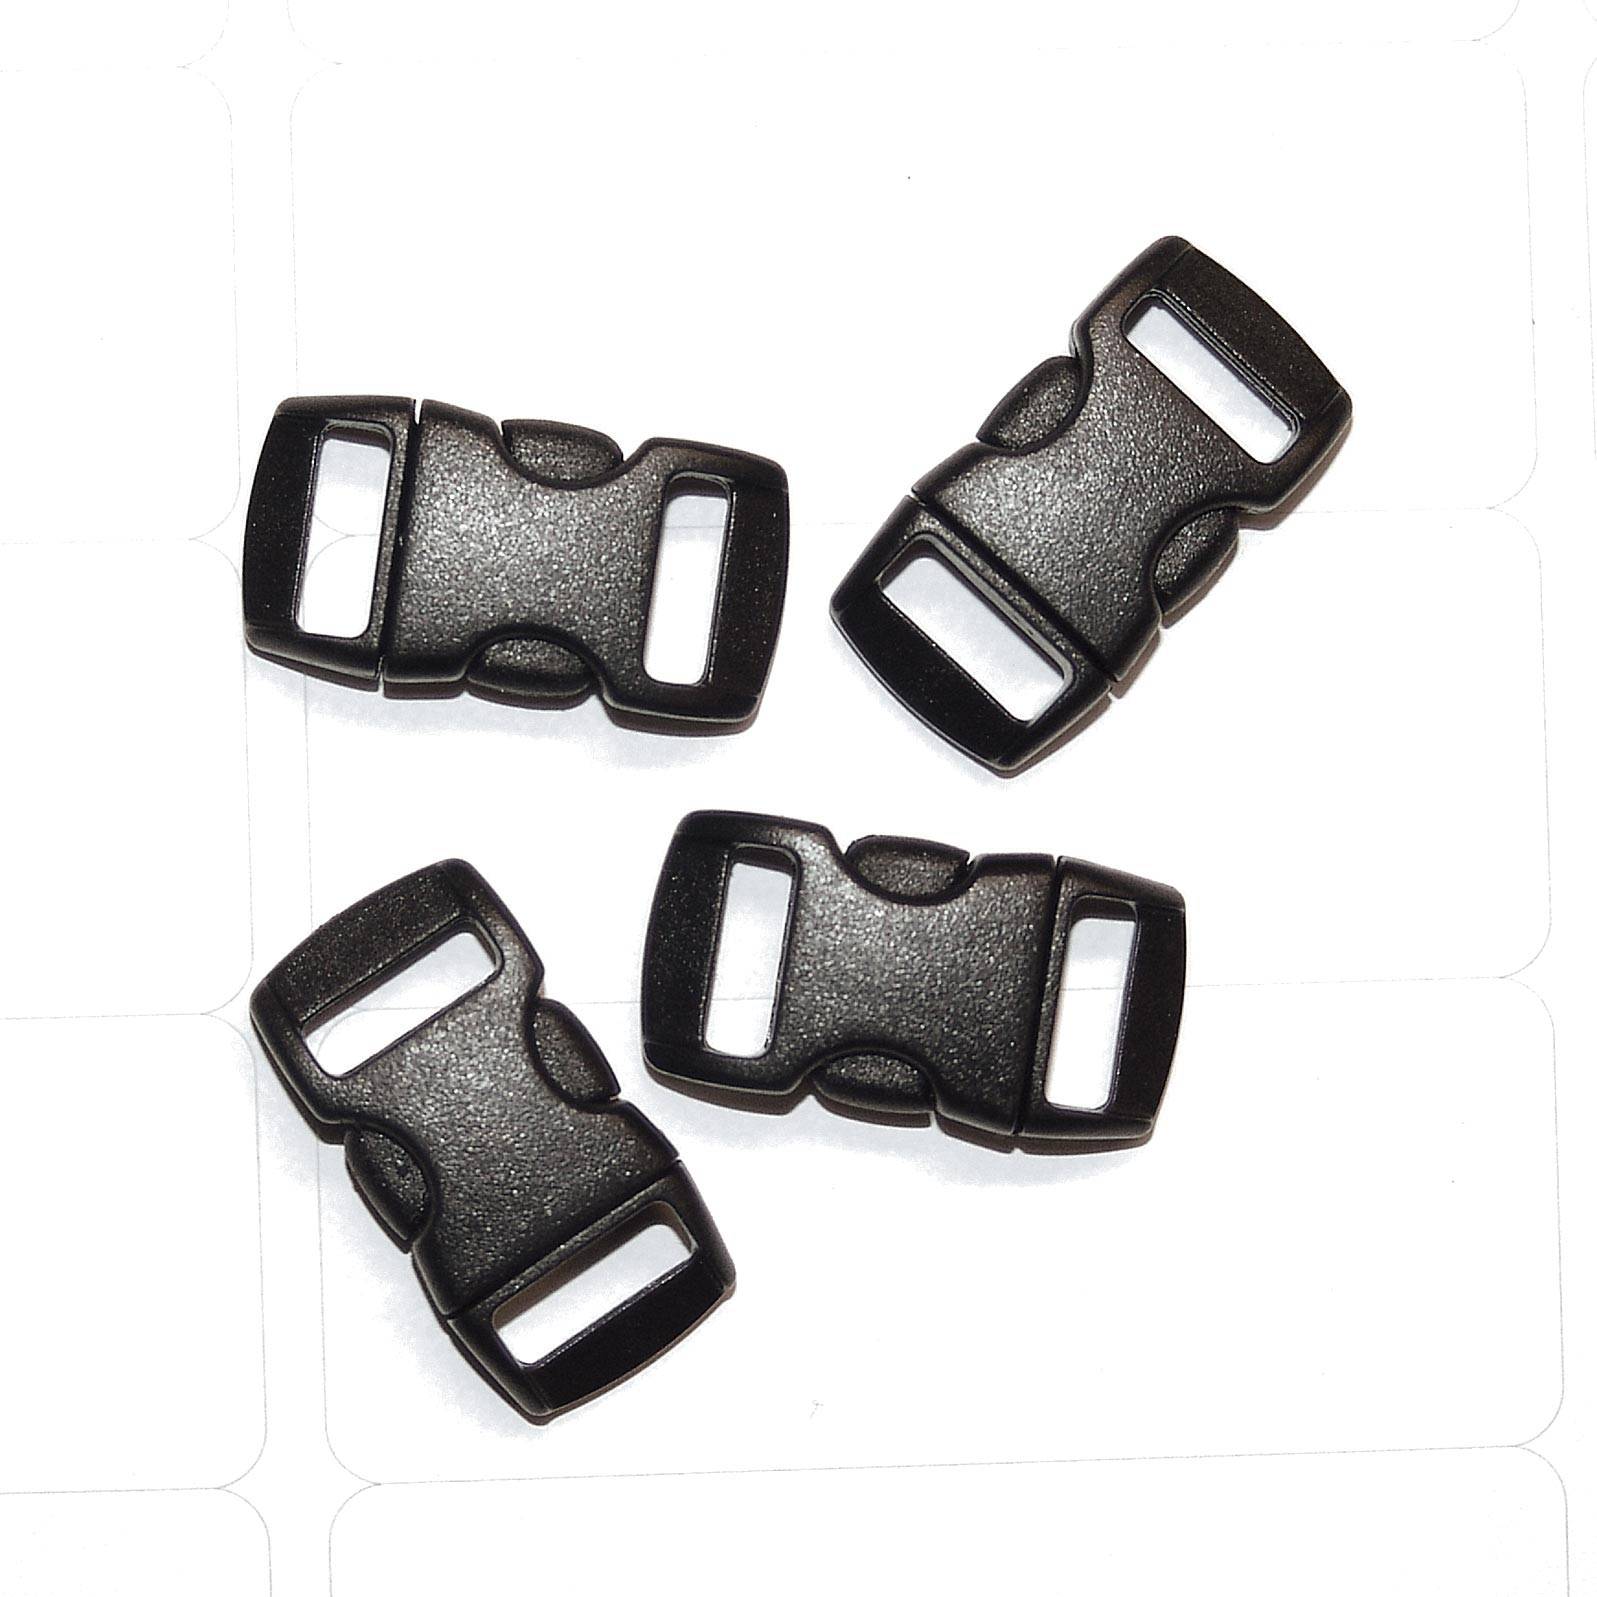 5ive Star Gear Quick Release 3/8 Inch Buckle